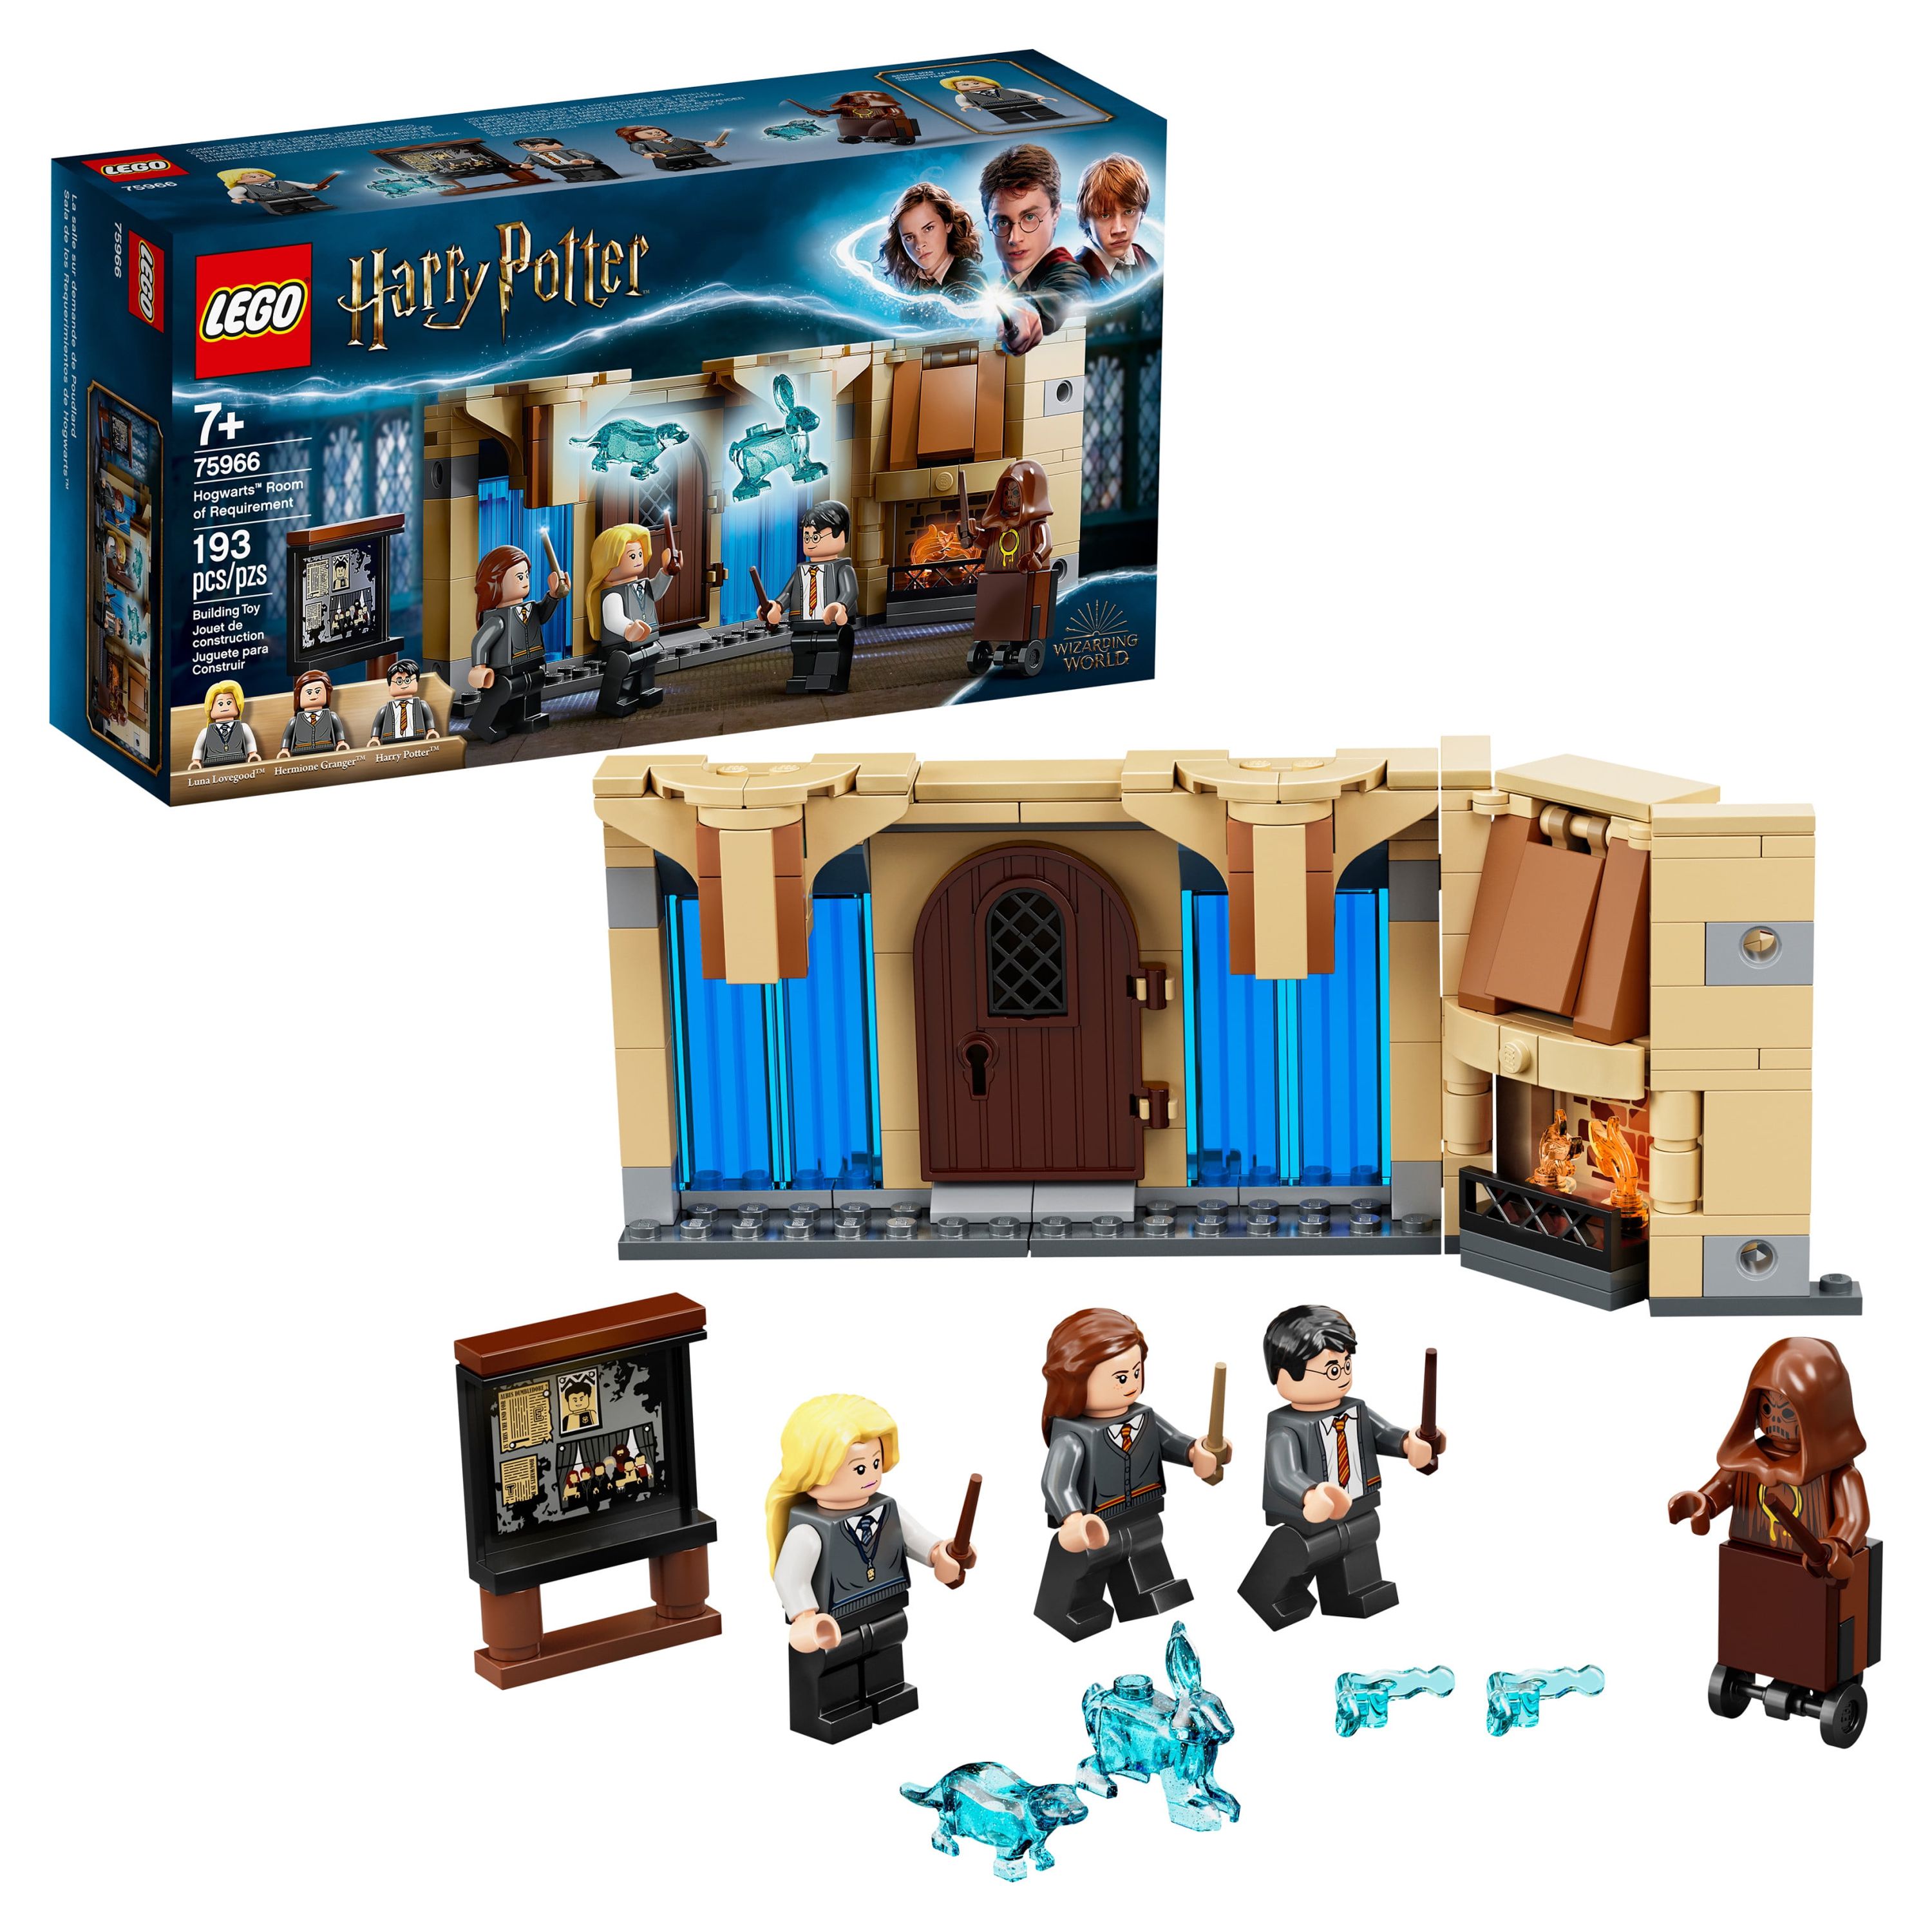 LEGO Hogwarts Room of Requirement 75966 Building Set (193 Pieces) - image 1 of 8